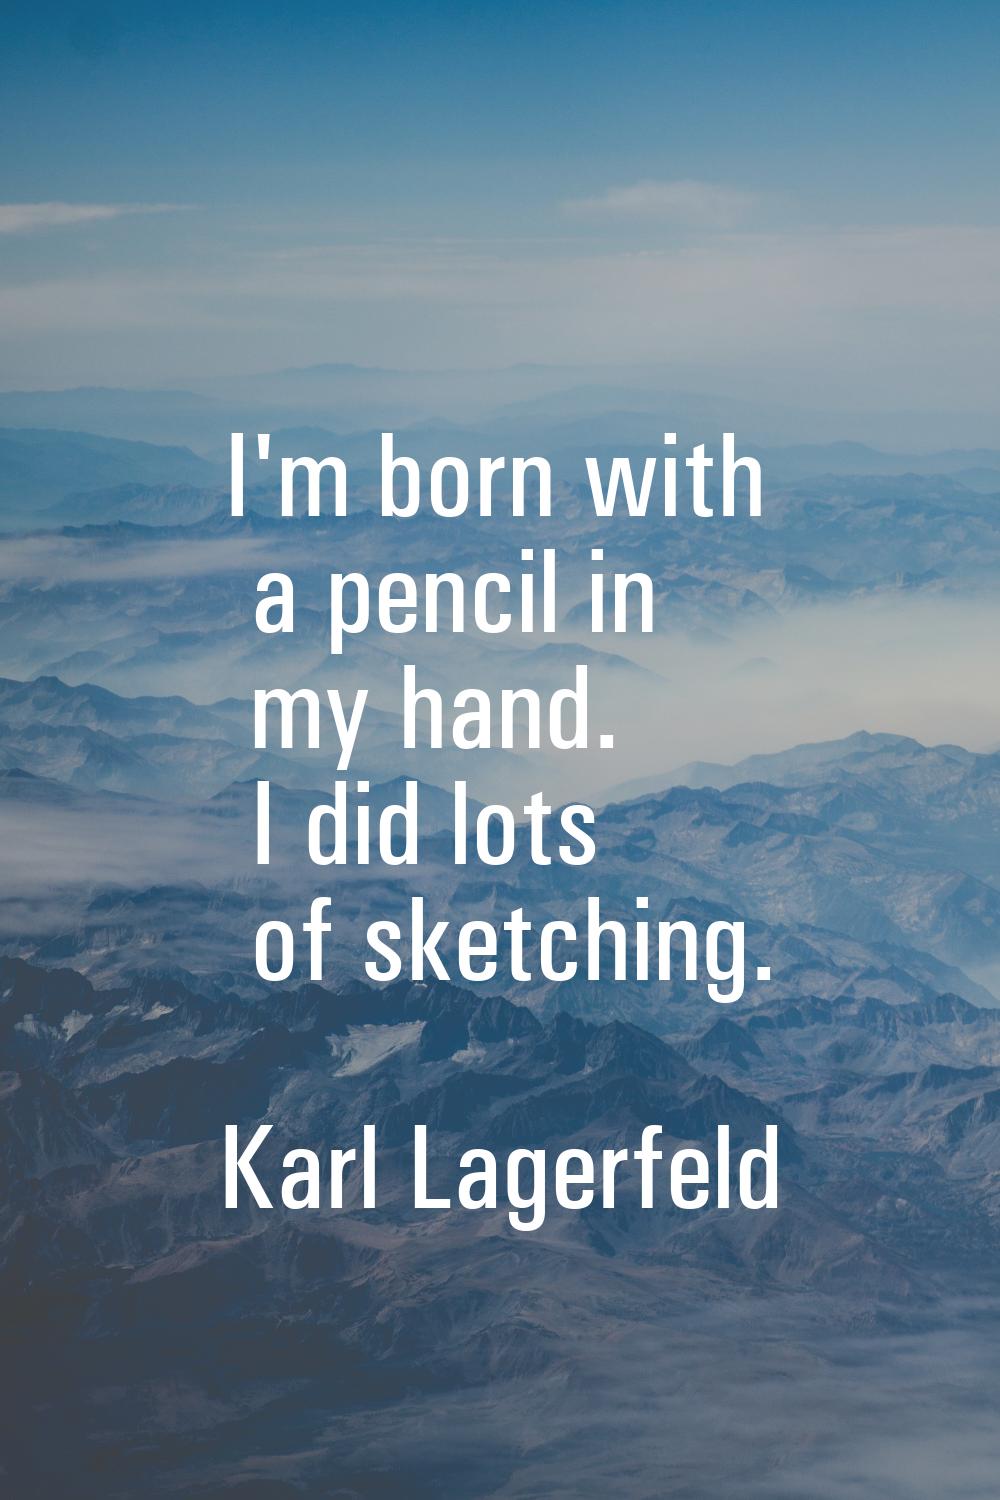 I'm born with a pencil in my hand. I did lots of sketching.